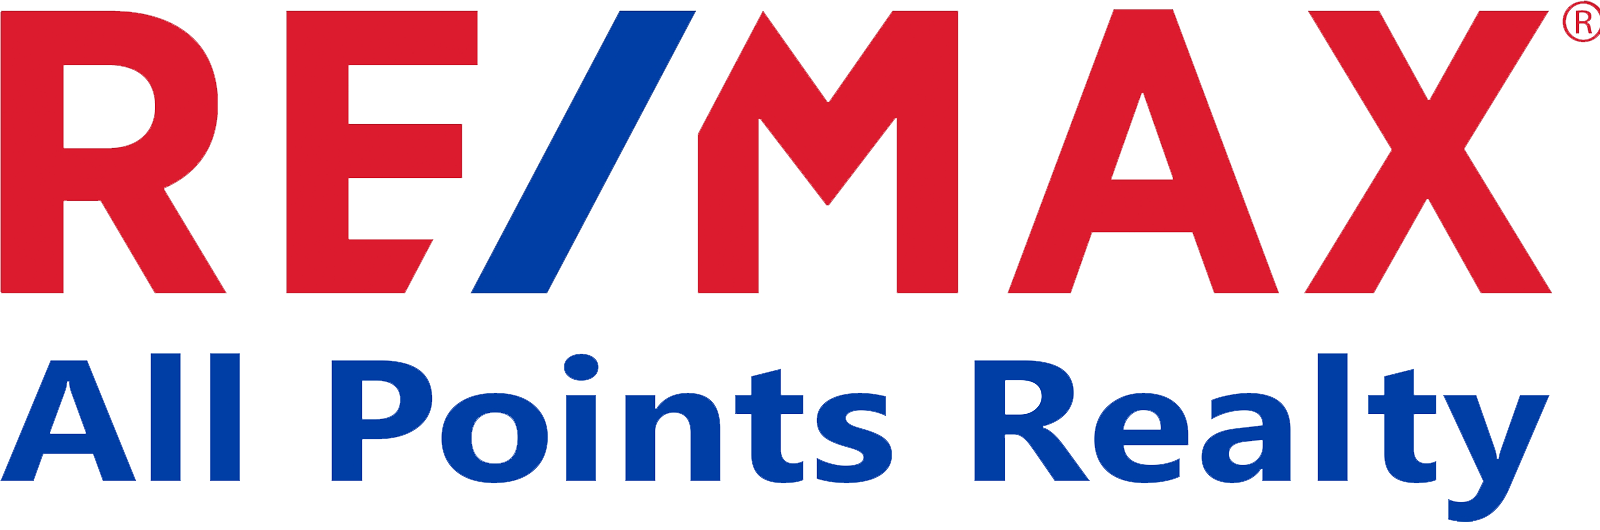 remax-all-points-realty